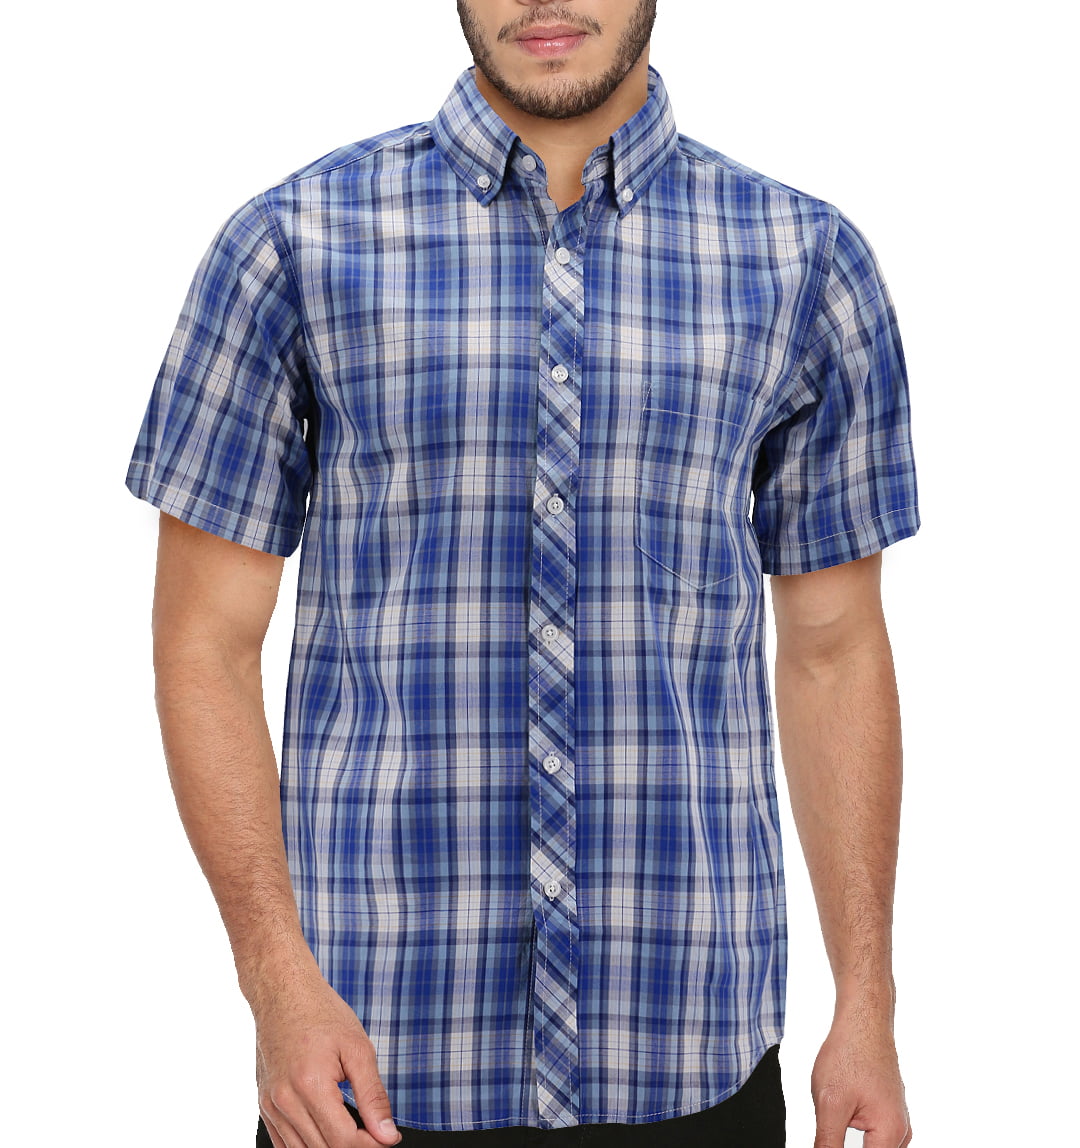 Men’s Cotton Casual Short Sleeve Classic Collared Plaid Button Up Dress ...